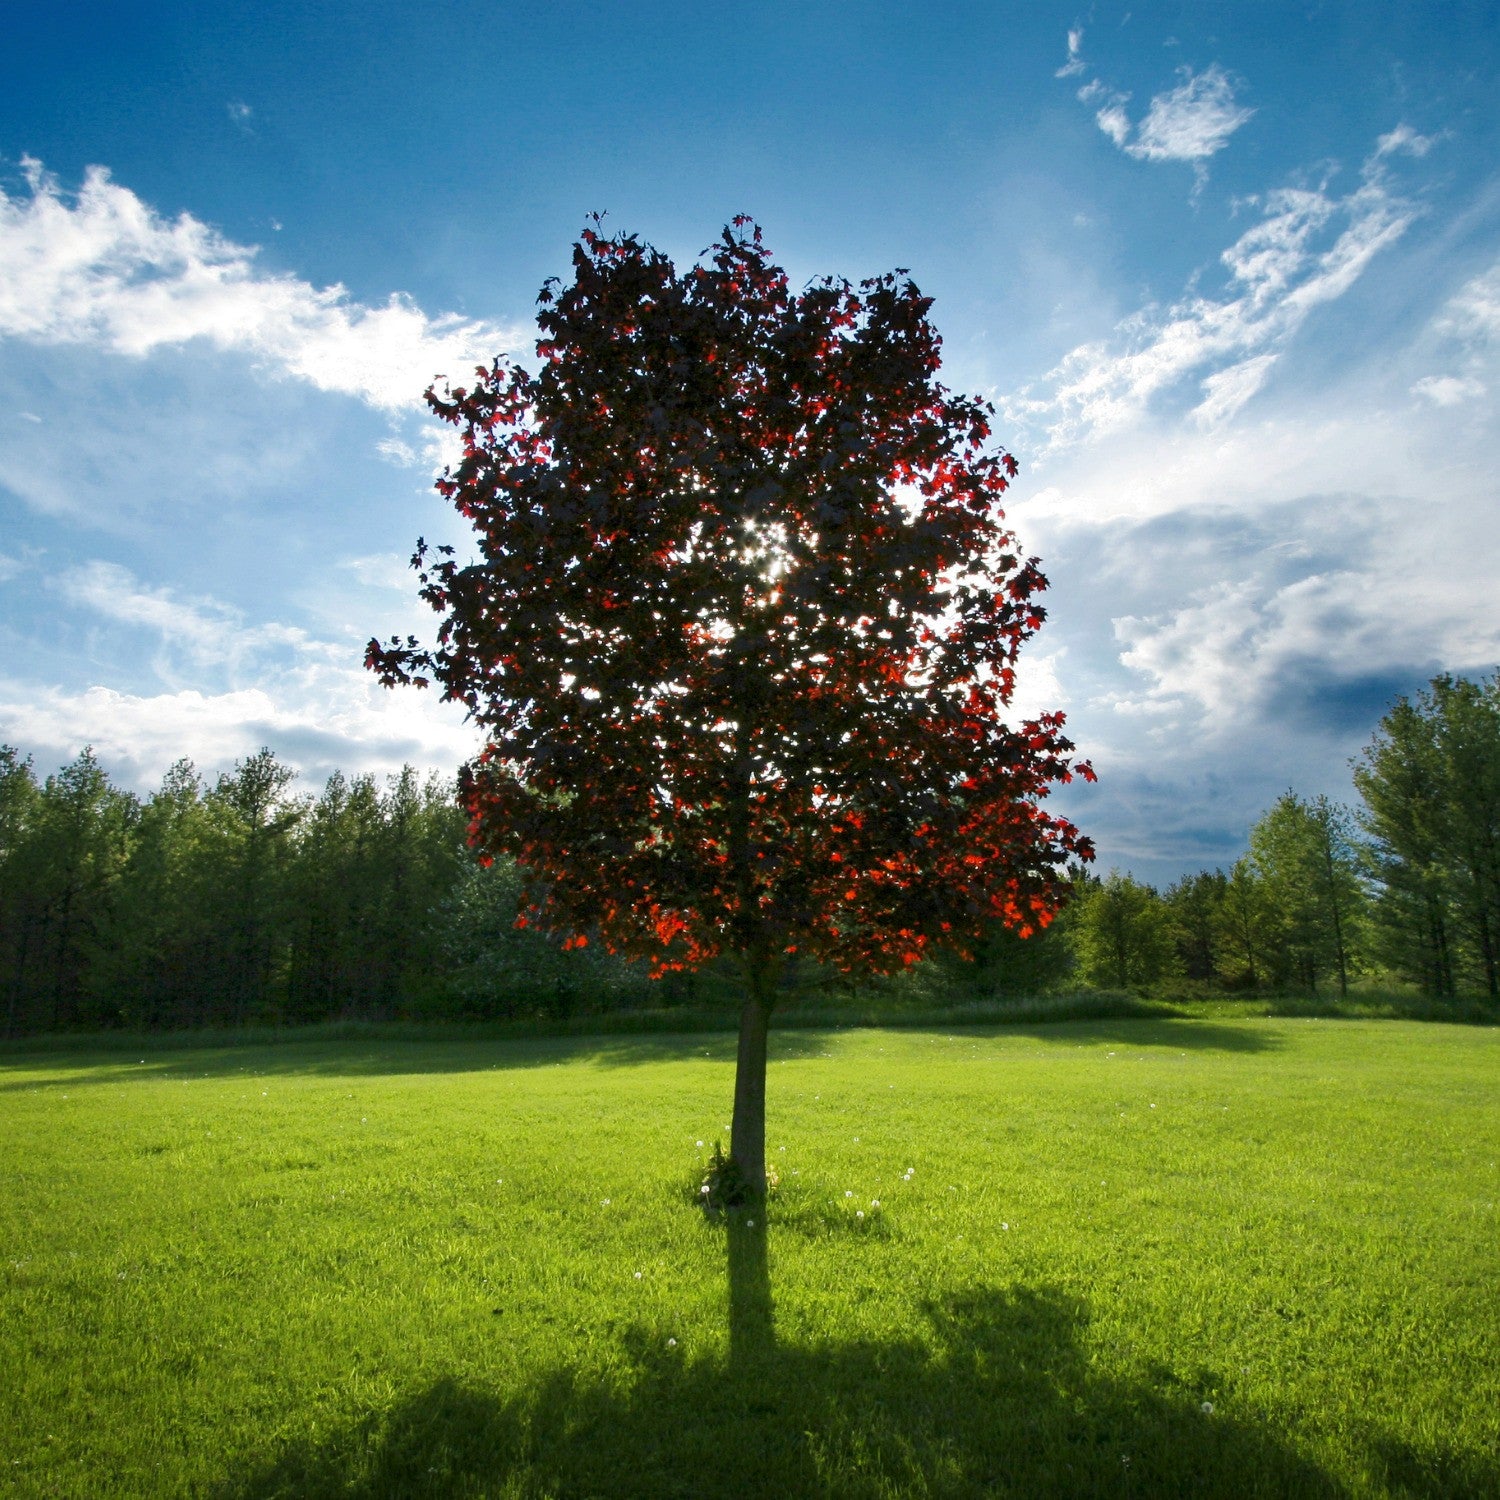 The Red Maple - Vivid Year-Round Color!